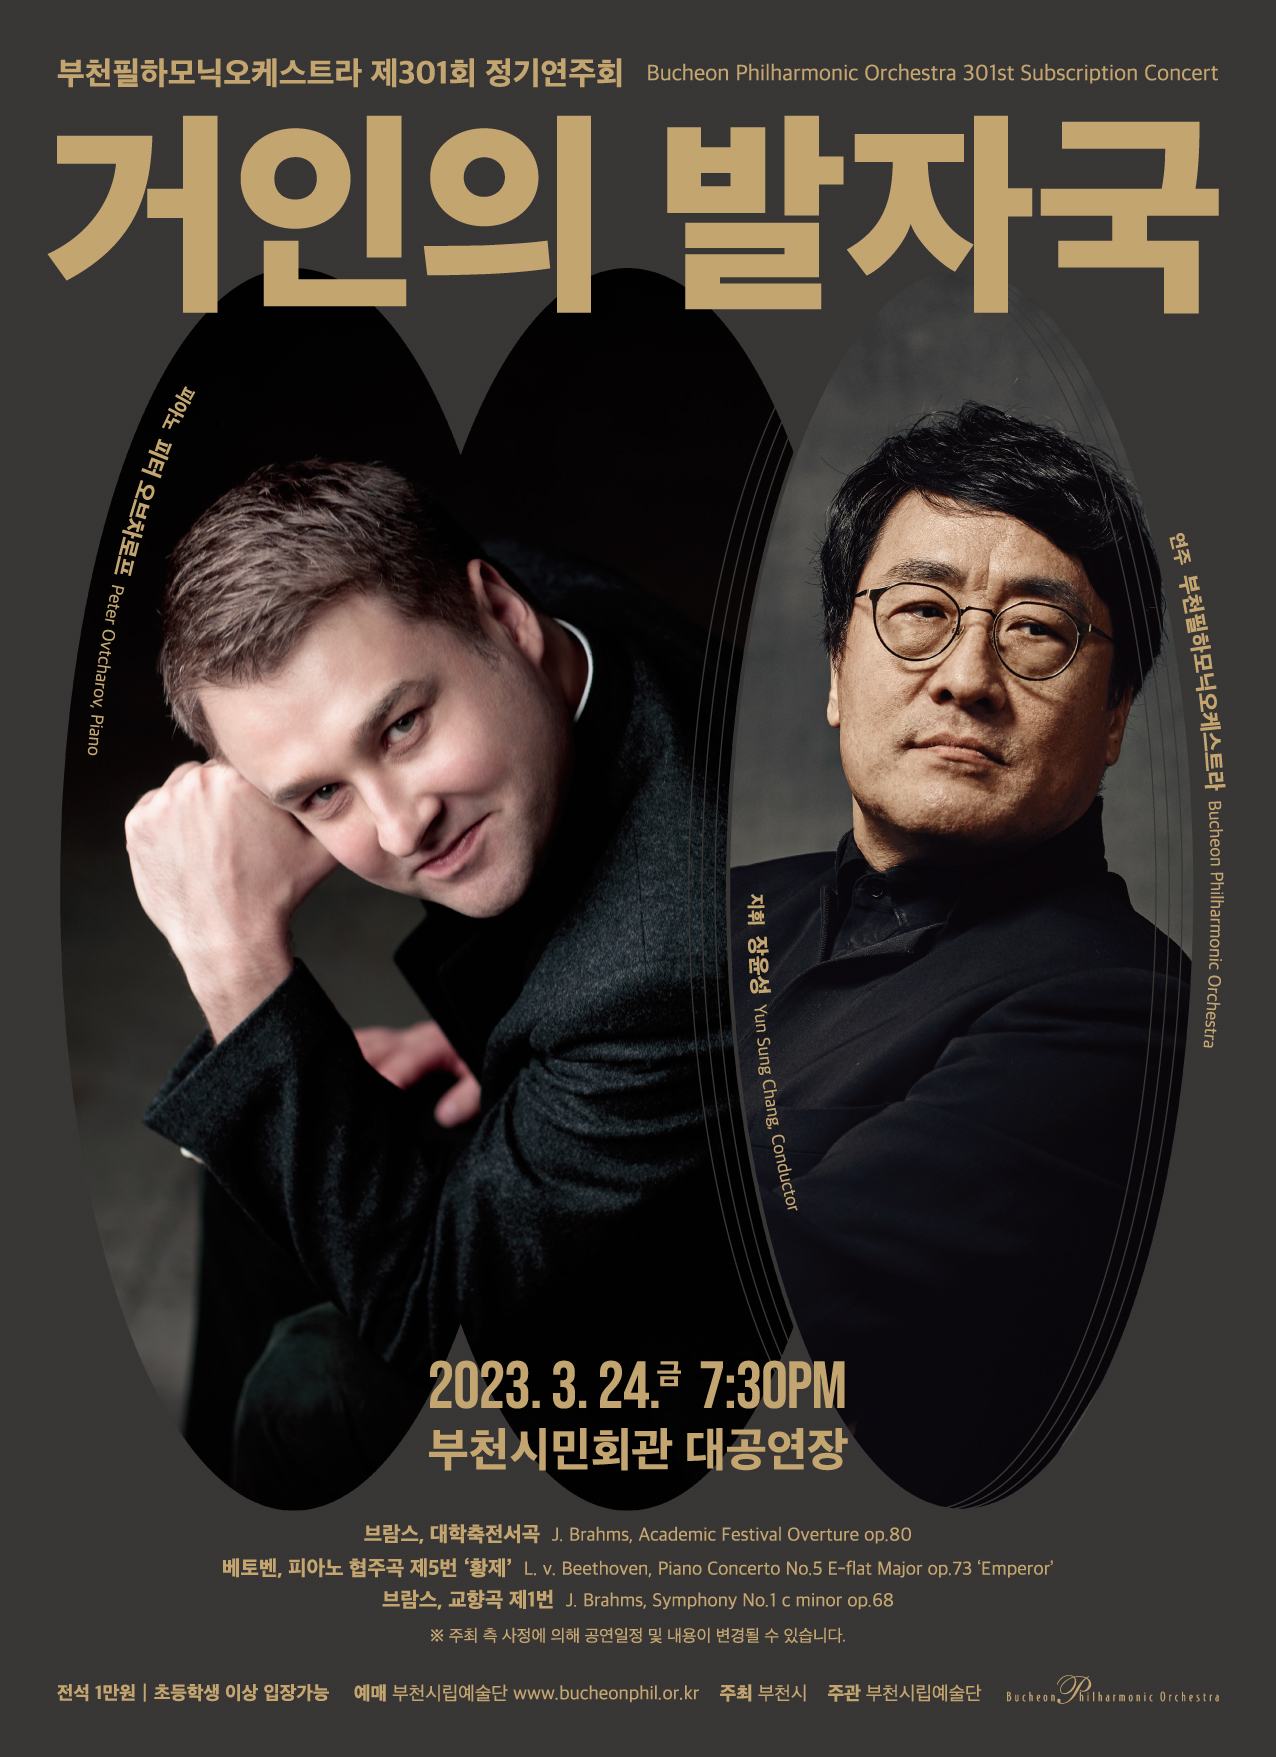 [3.24] Bucheon Philharmonic Orchestra 301st Subscription Concert - Walking in the Footsteps of a Giant